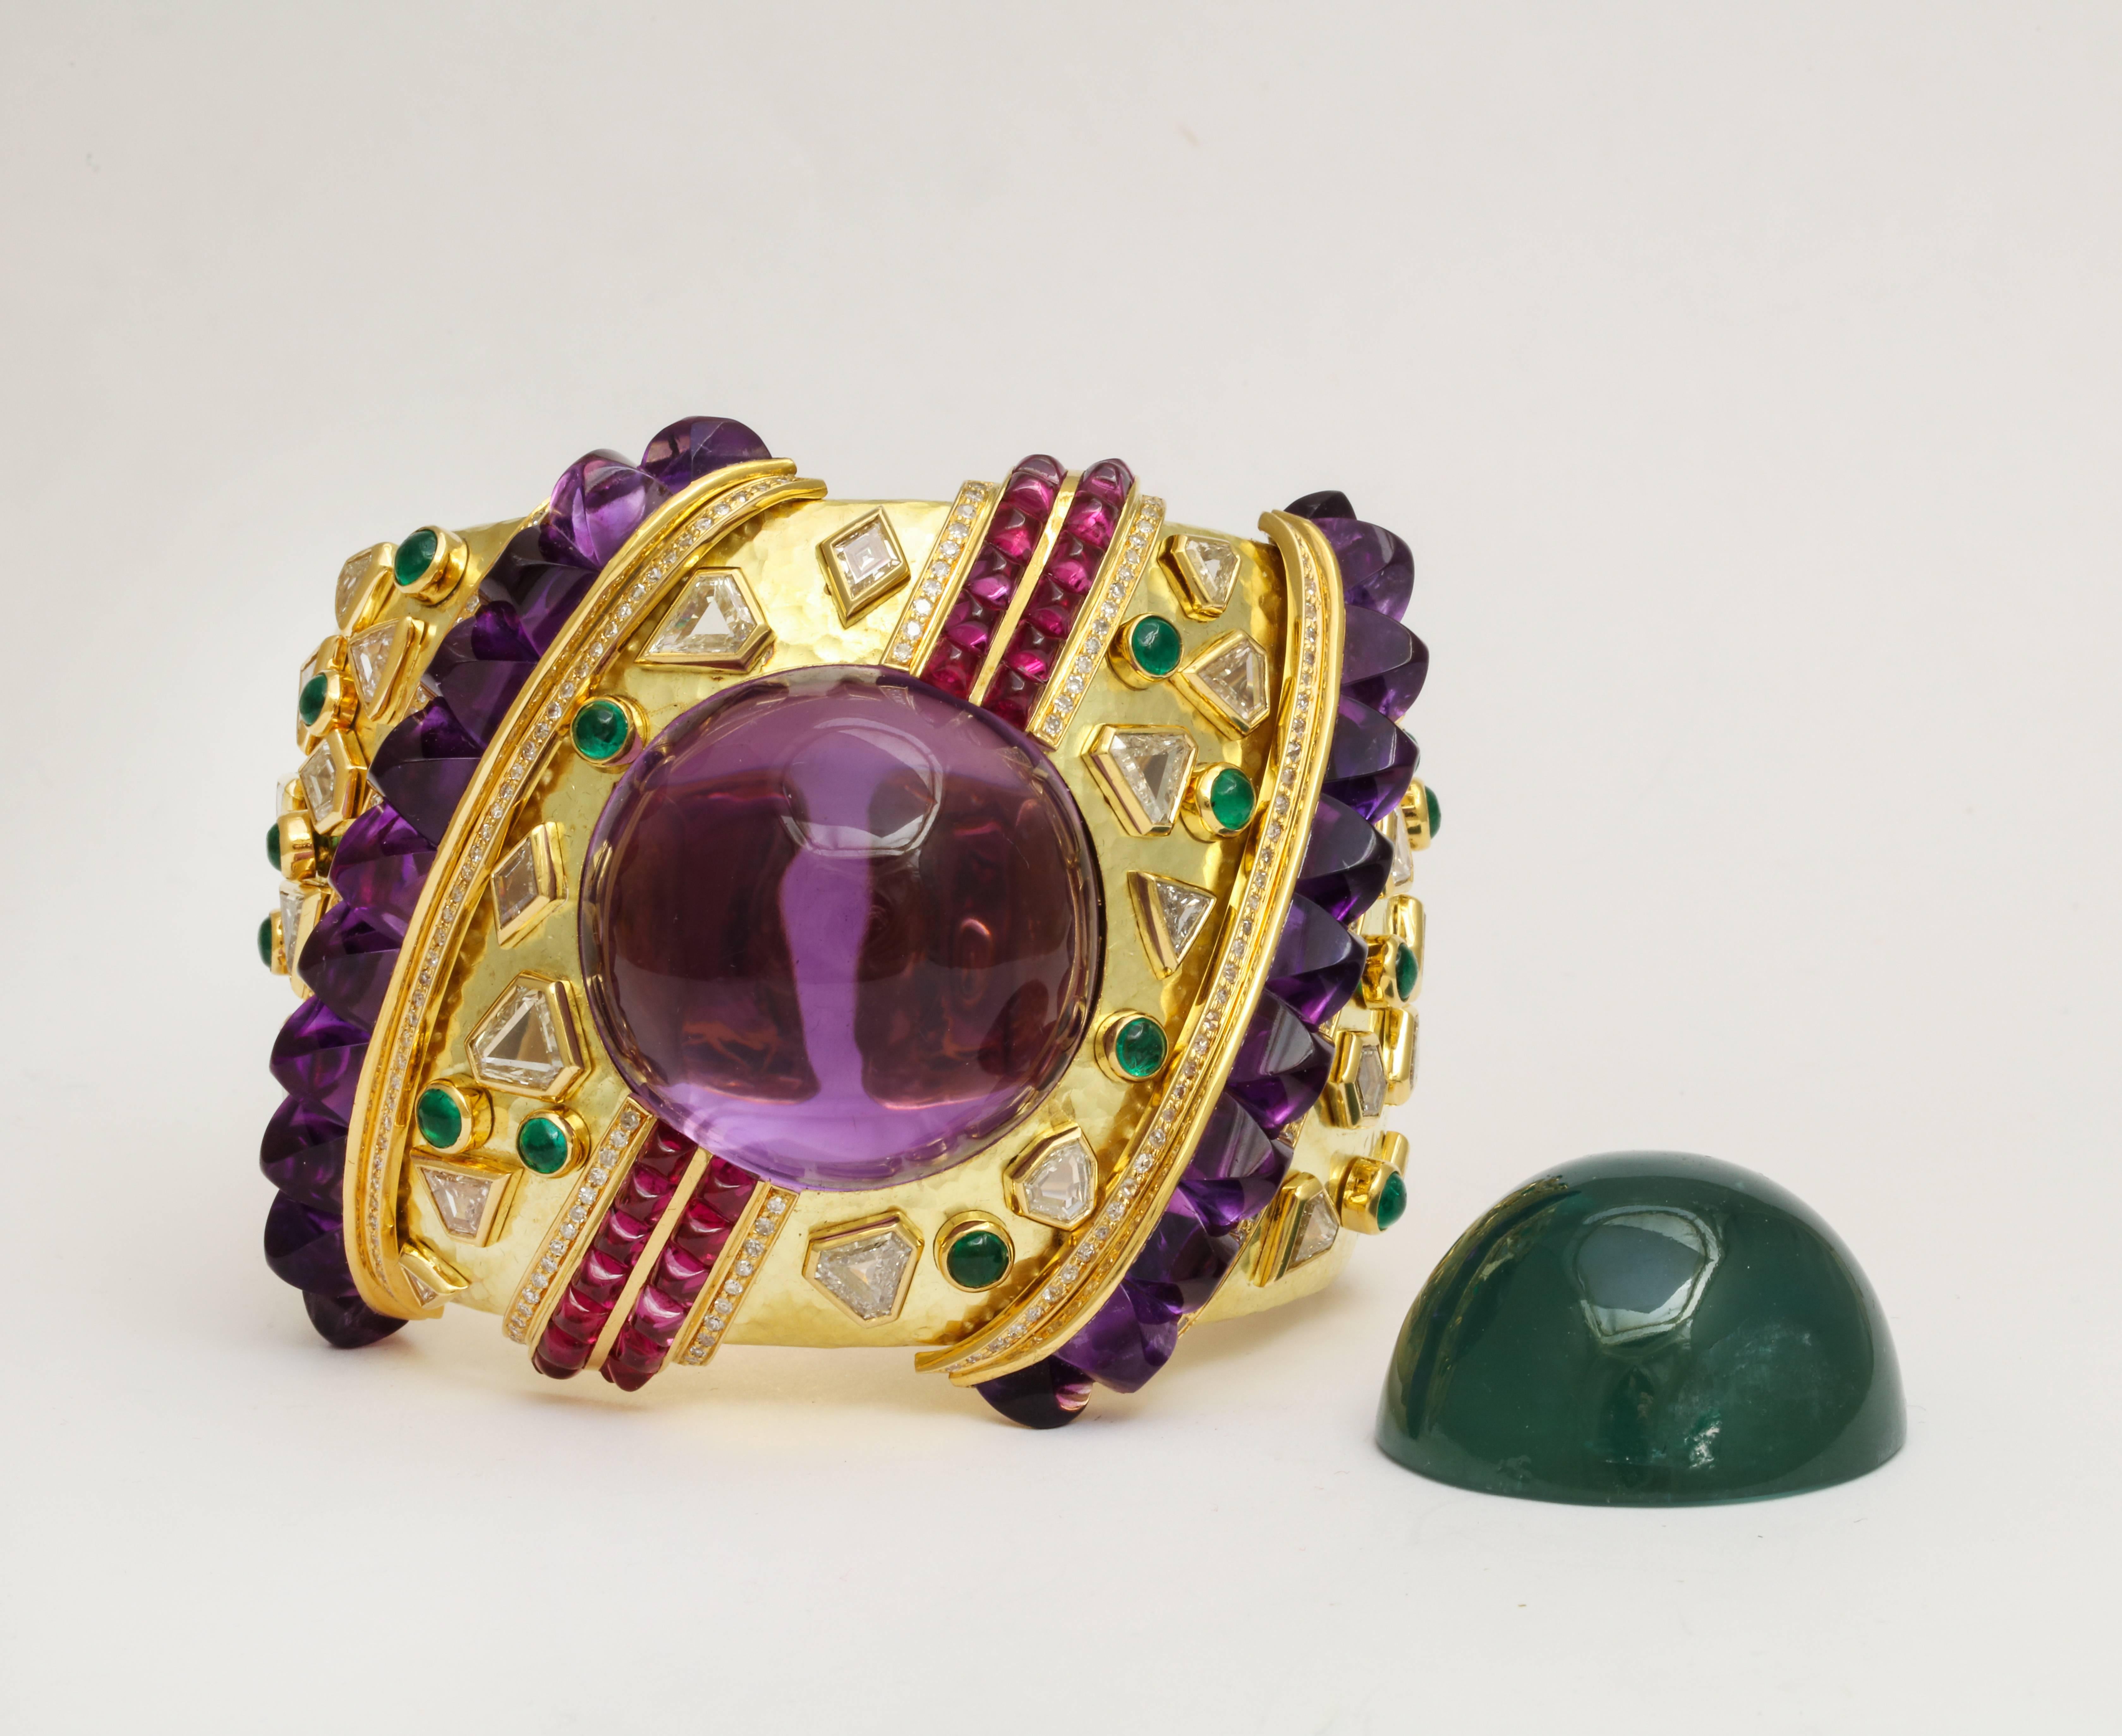 A magnificent 1980s one-of-a-kind Demner convertible bracelet of hammered 18K gold set with numerous large geometric cut diamonds and cabochon emeralds, centered by a large cabochon amethyst stone (154.31 cts) which can be switched to a natural